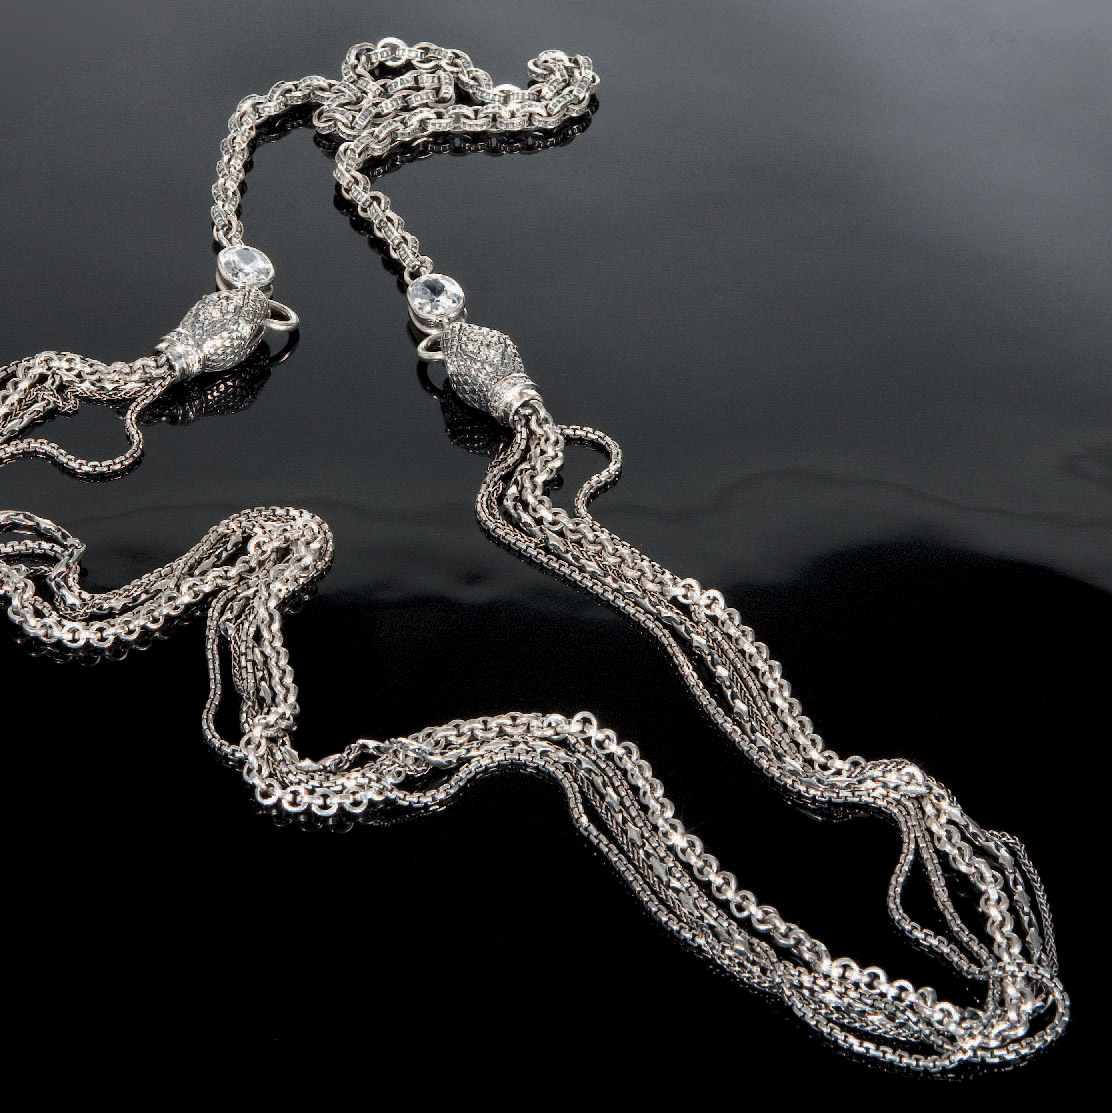 Barbara Bui Bijoux: All Chained Up